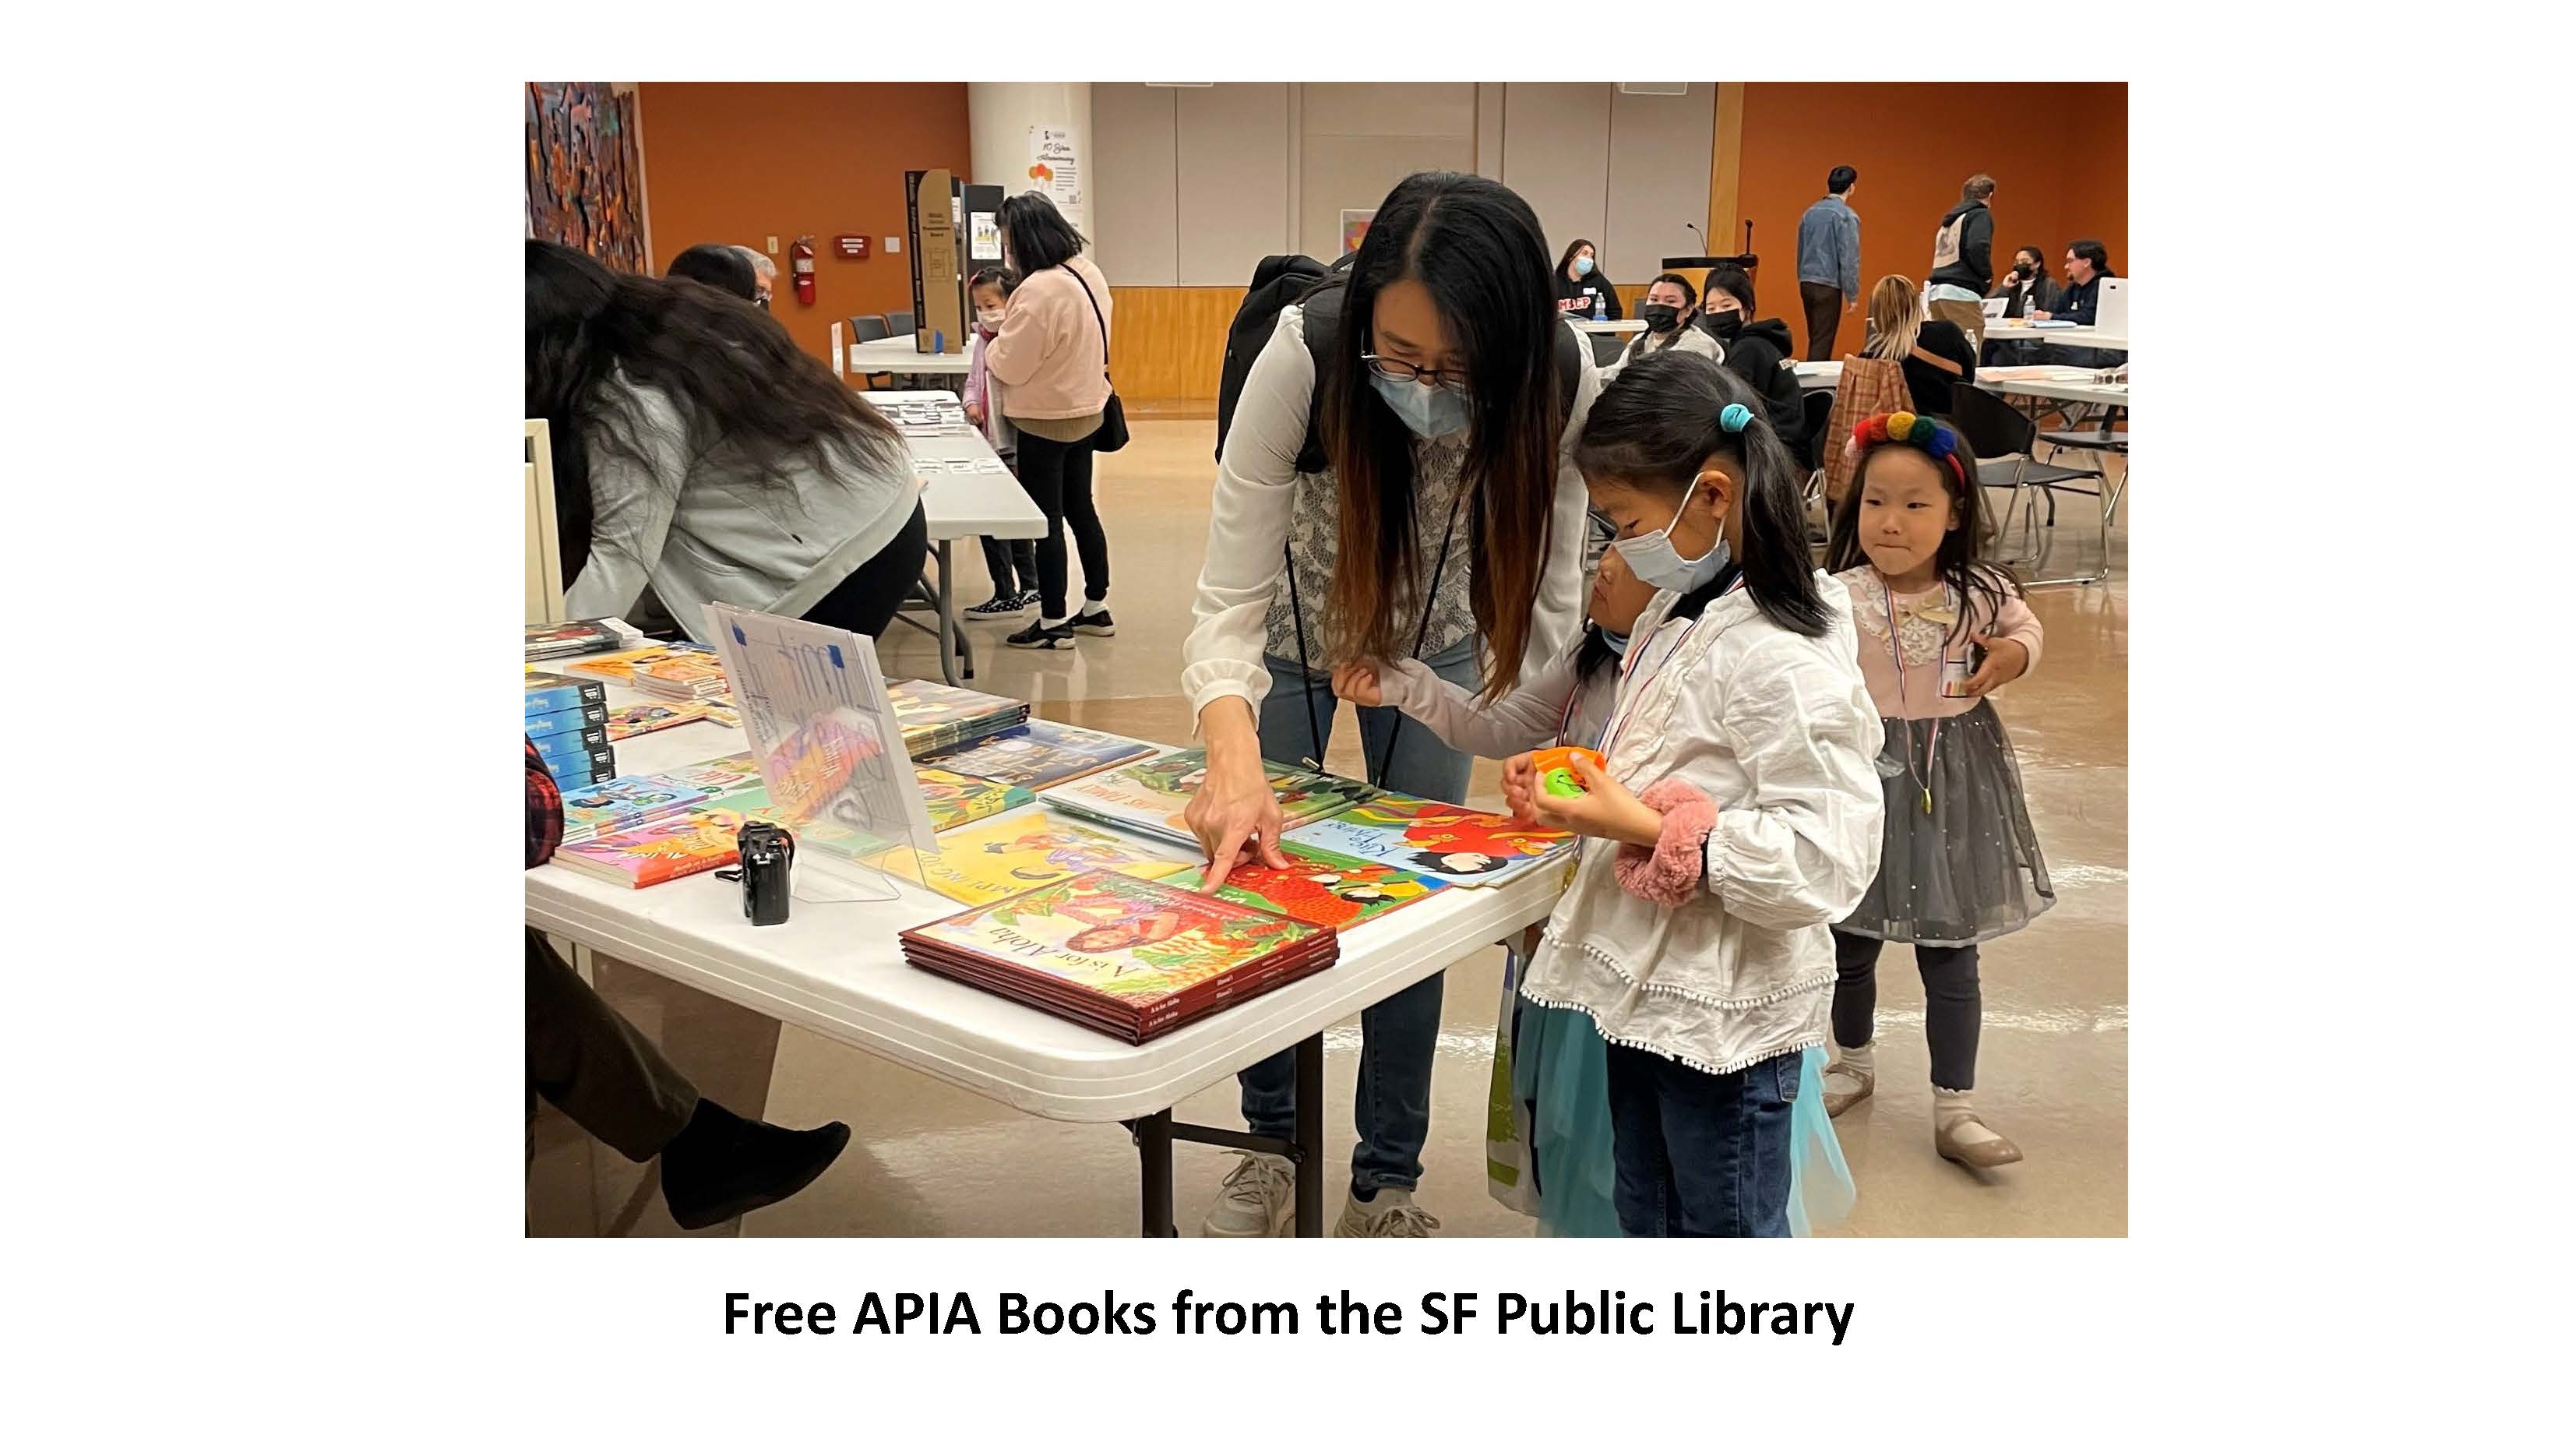 Choosing free APIA books from the library